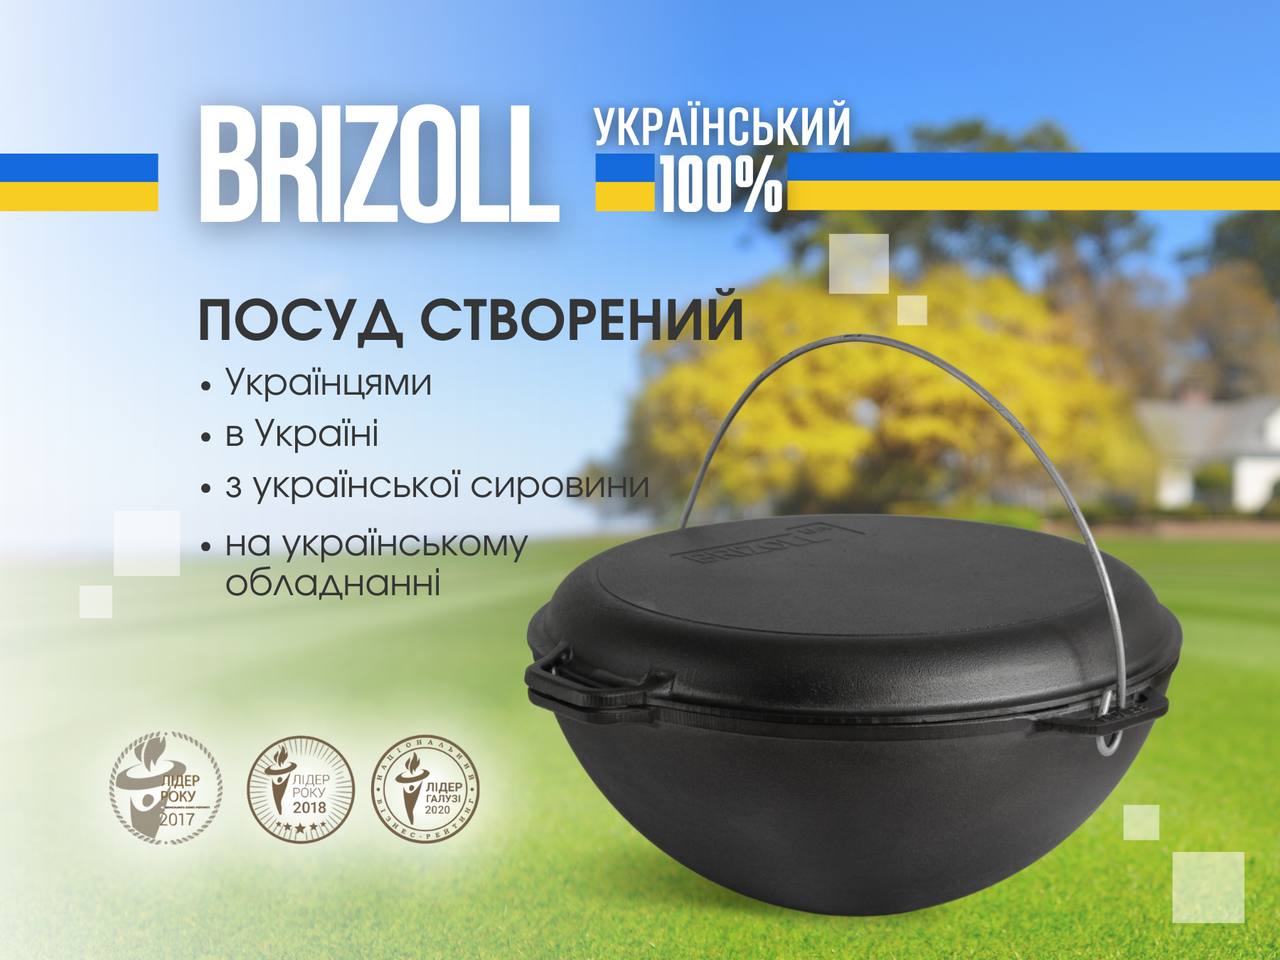 Cast iron asian cauldron WITH A GRILL LID-FRYING PAN 12 L